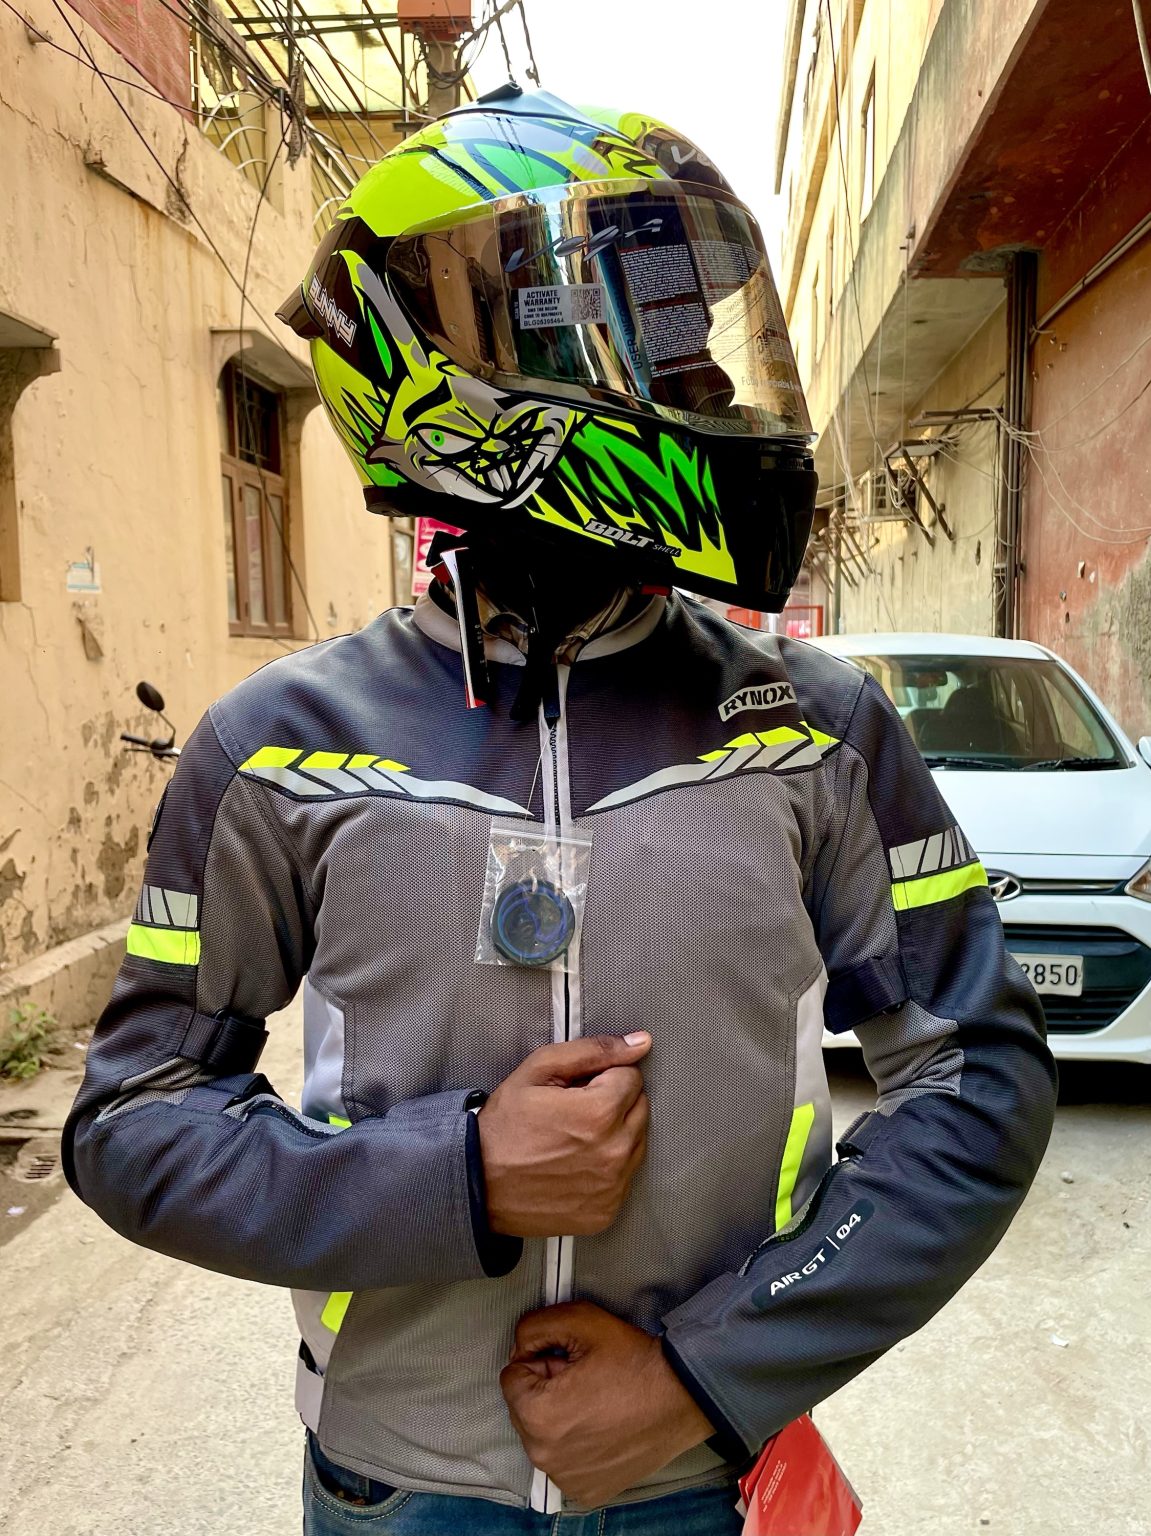 Spartan ProGear Co. - 𝐒𝐜𝐢𝐦𝐢𝐭𝐚𝐫 𝐑𝐚𝐳𝐨𝐫 𝐑𝐢𝐝𝐢𝐧𝐠  𝐉𝐚𝐜𝐤𝐞𝐭𝐬 : Don't let the weather dictate you when you ride. The  all-weather Scimitar Razor 2 jacket with its rugged mesh fabric, removable  rain liner